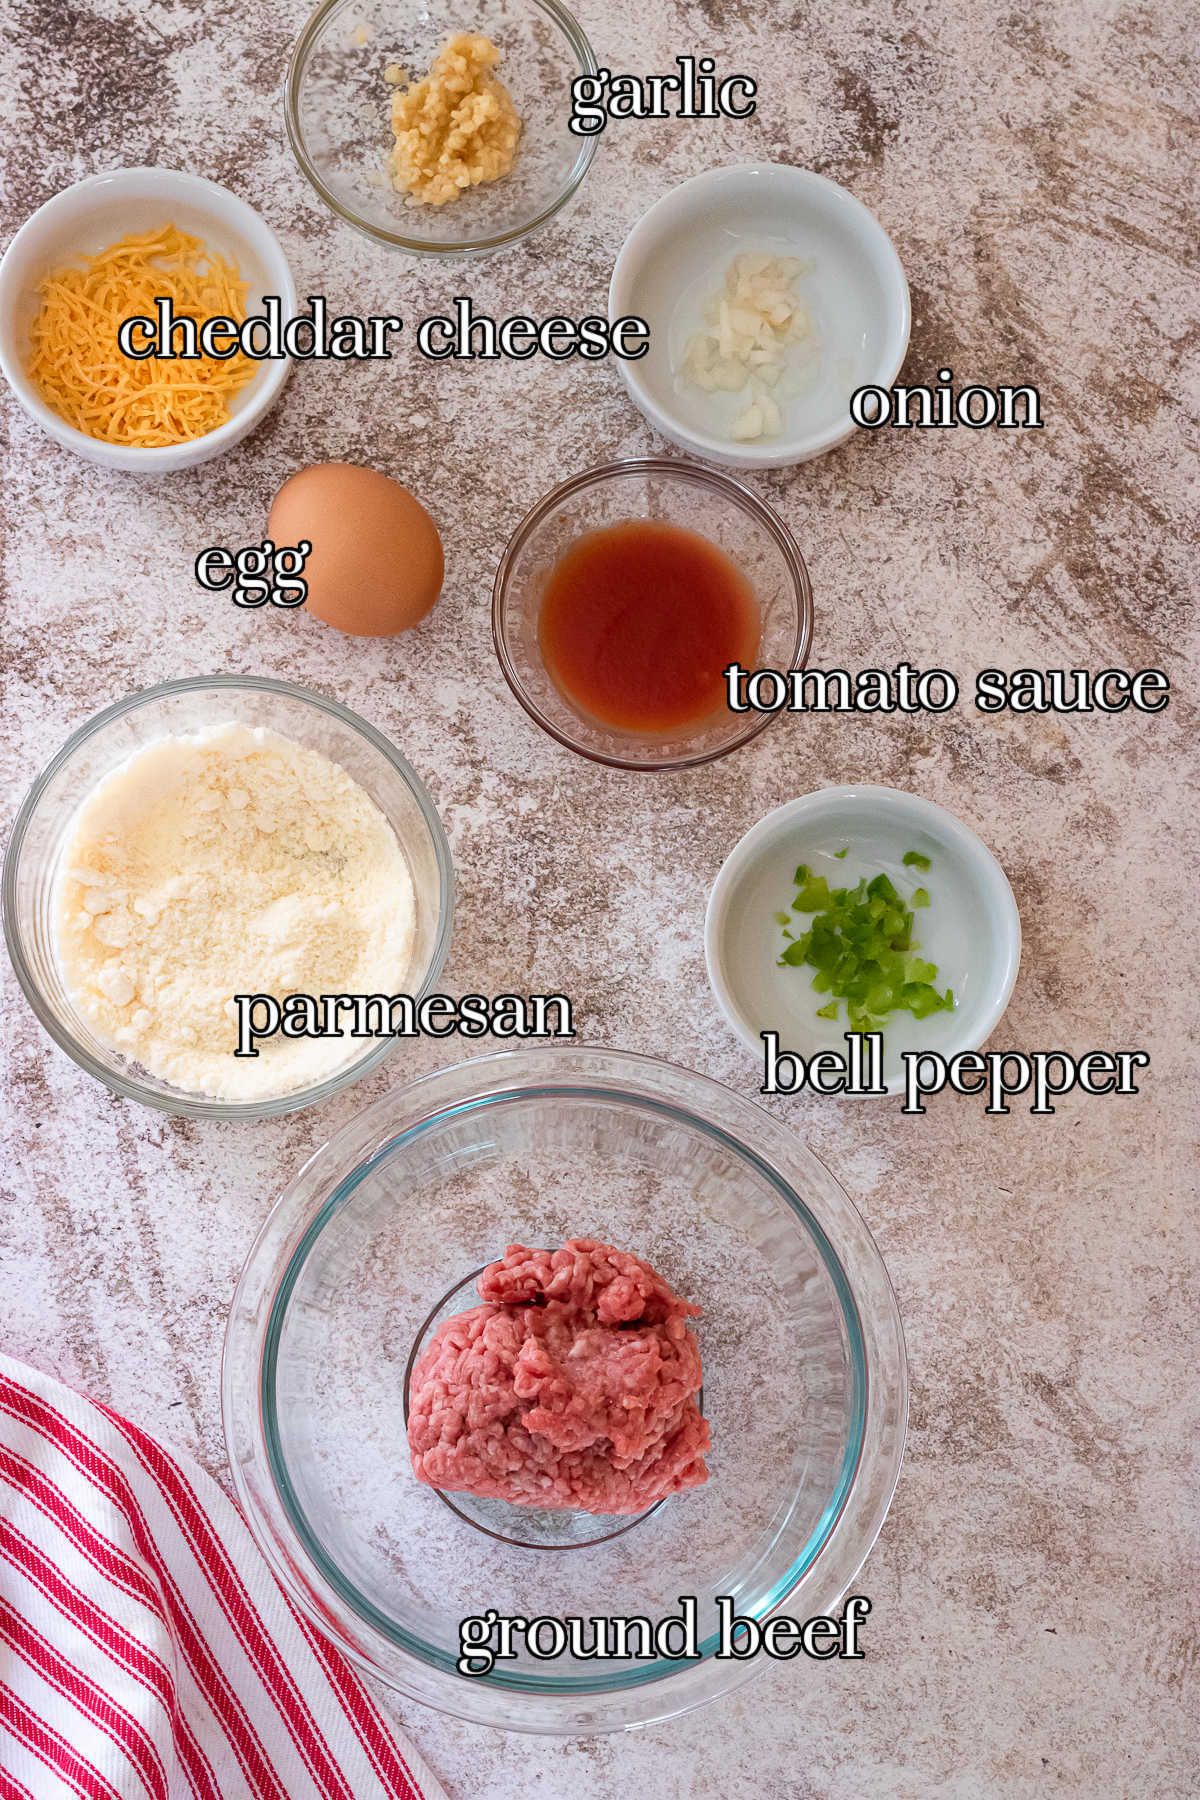 Labeled ingredients for low carb meatloaf